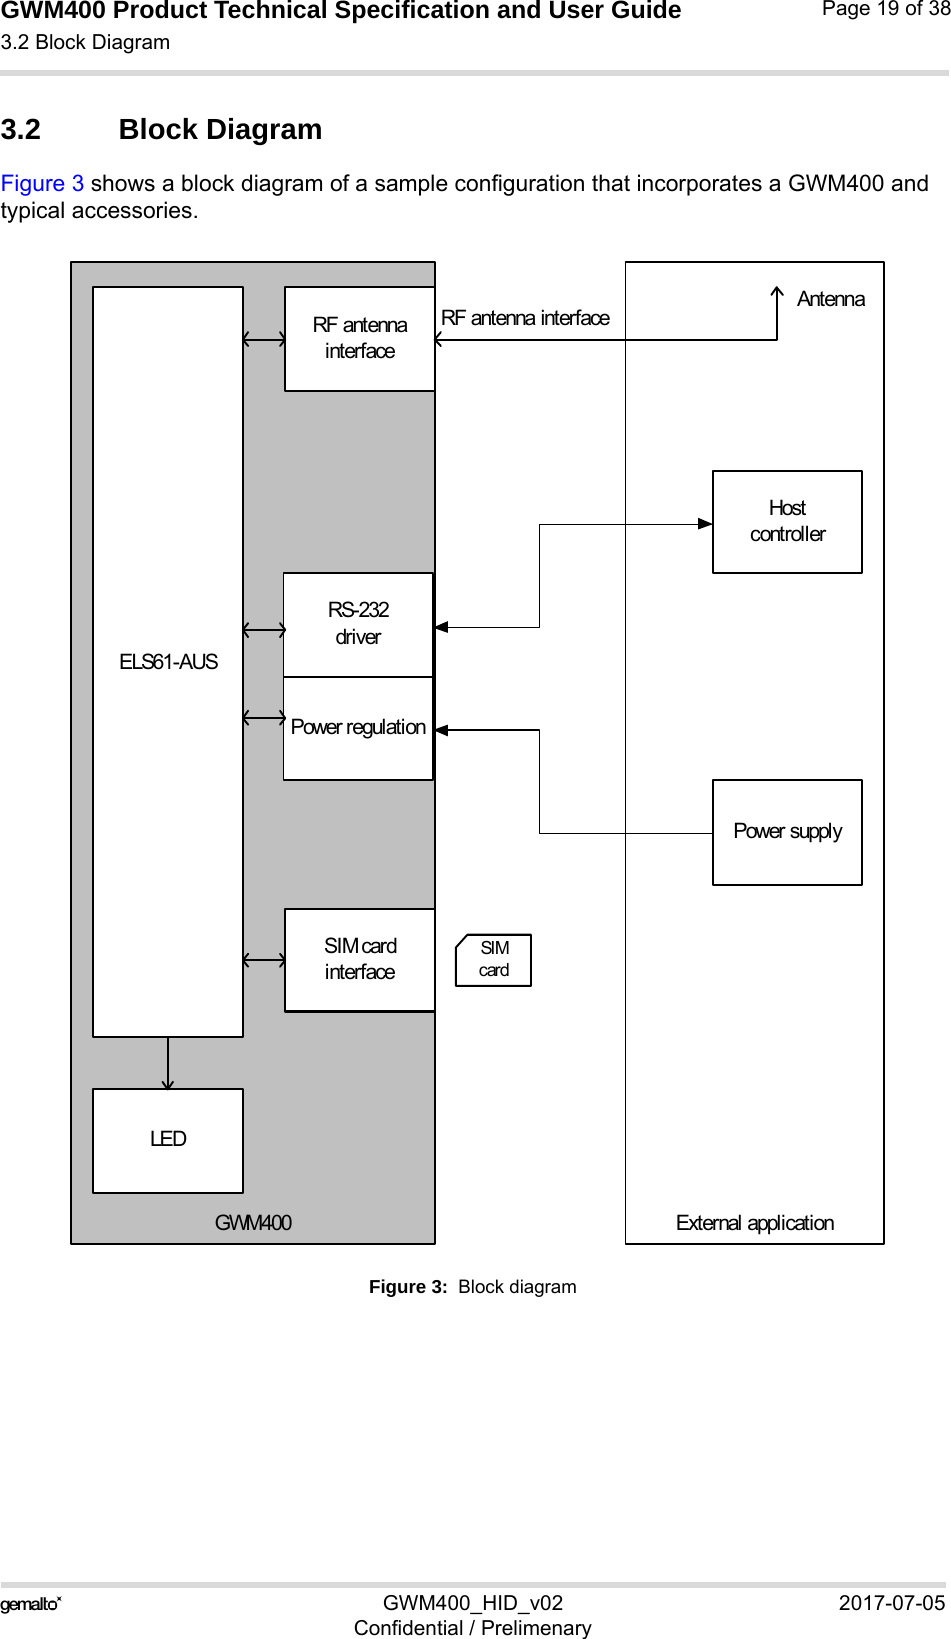 GWM400 Product Technical Specification and User Guide3.2 Block Diagram25GWM400_HID_v02 2017-07-05Confidential / PrelimenaryPage 19 of 383.2 Block DiagramFigure 3 shows a block diagram of a sample configuration that incorporates a GWM400 and typical accessories.Figure 3:  Block diagramGWM400ELS61-AUSRS-232driverSIM cardinterfacePower regulationRF antennainterfaceLEDRF antenna interfaceHostcontrollerPower supplyExternal applicationSIMcardAntenna